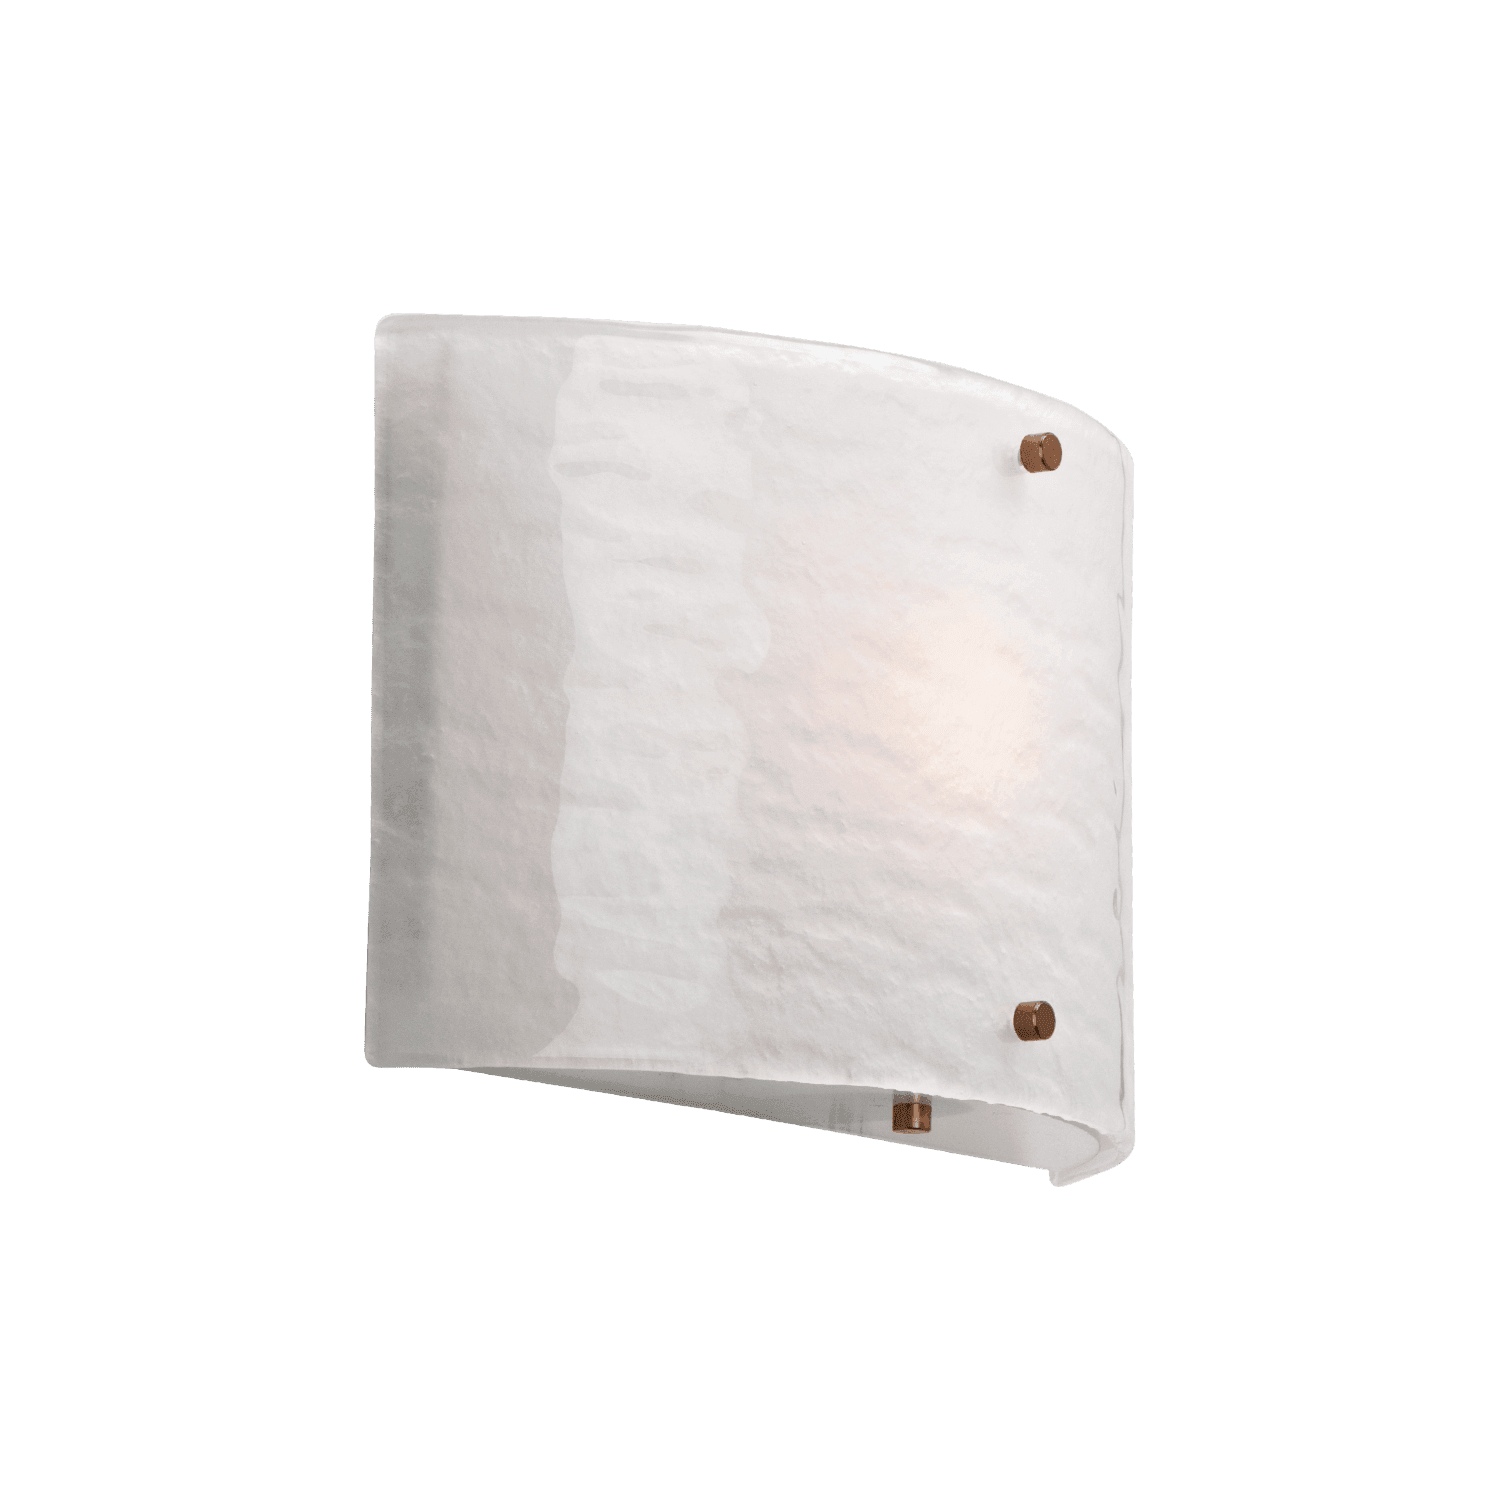 Hammerton Studio - Textured Glass Round Cover Sconce - CSB0044-0A-RB-FG-E2 | Montreal Lighting & Hardware